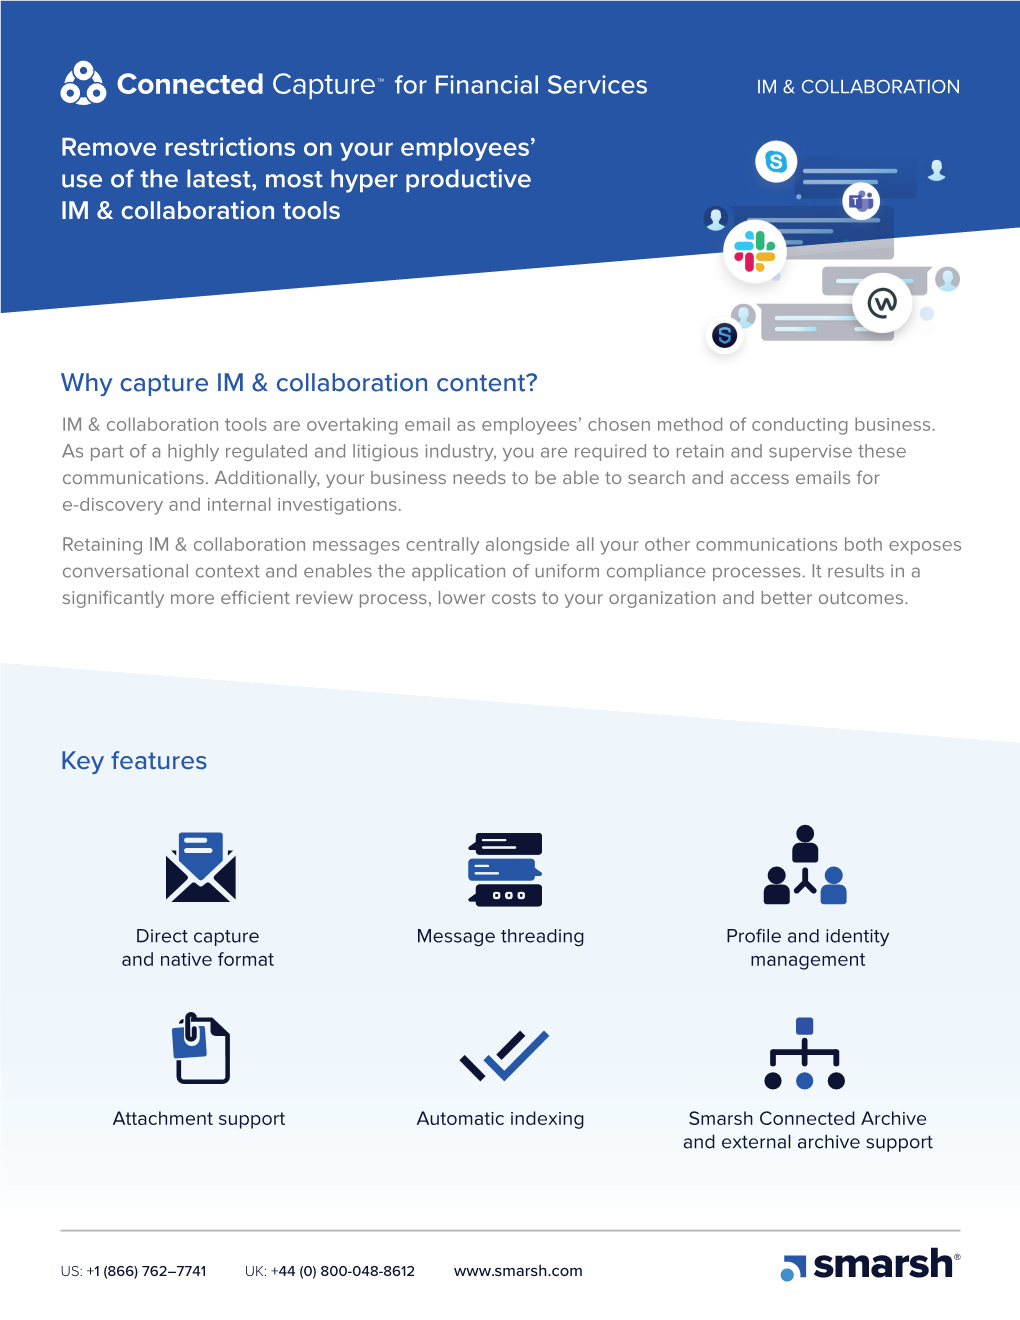 Why Capture IM & Collaboration Content?